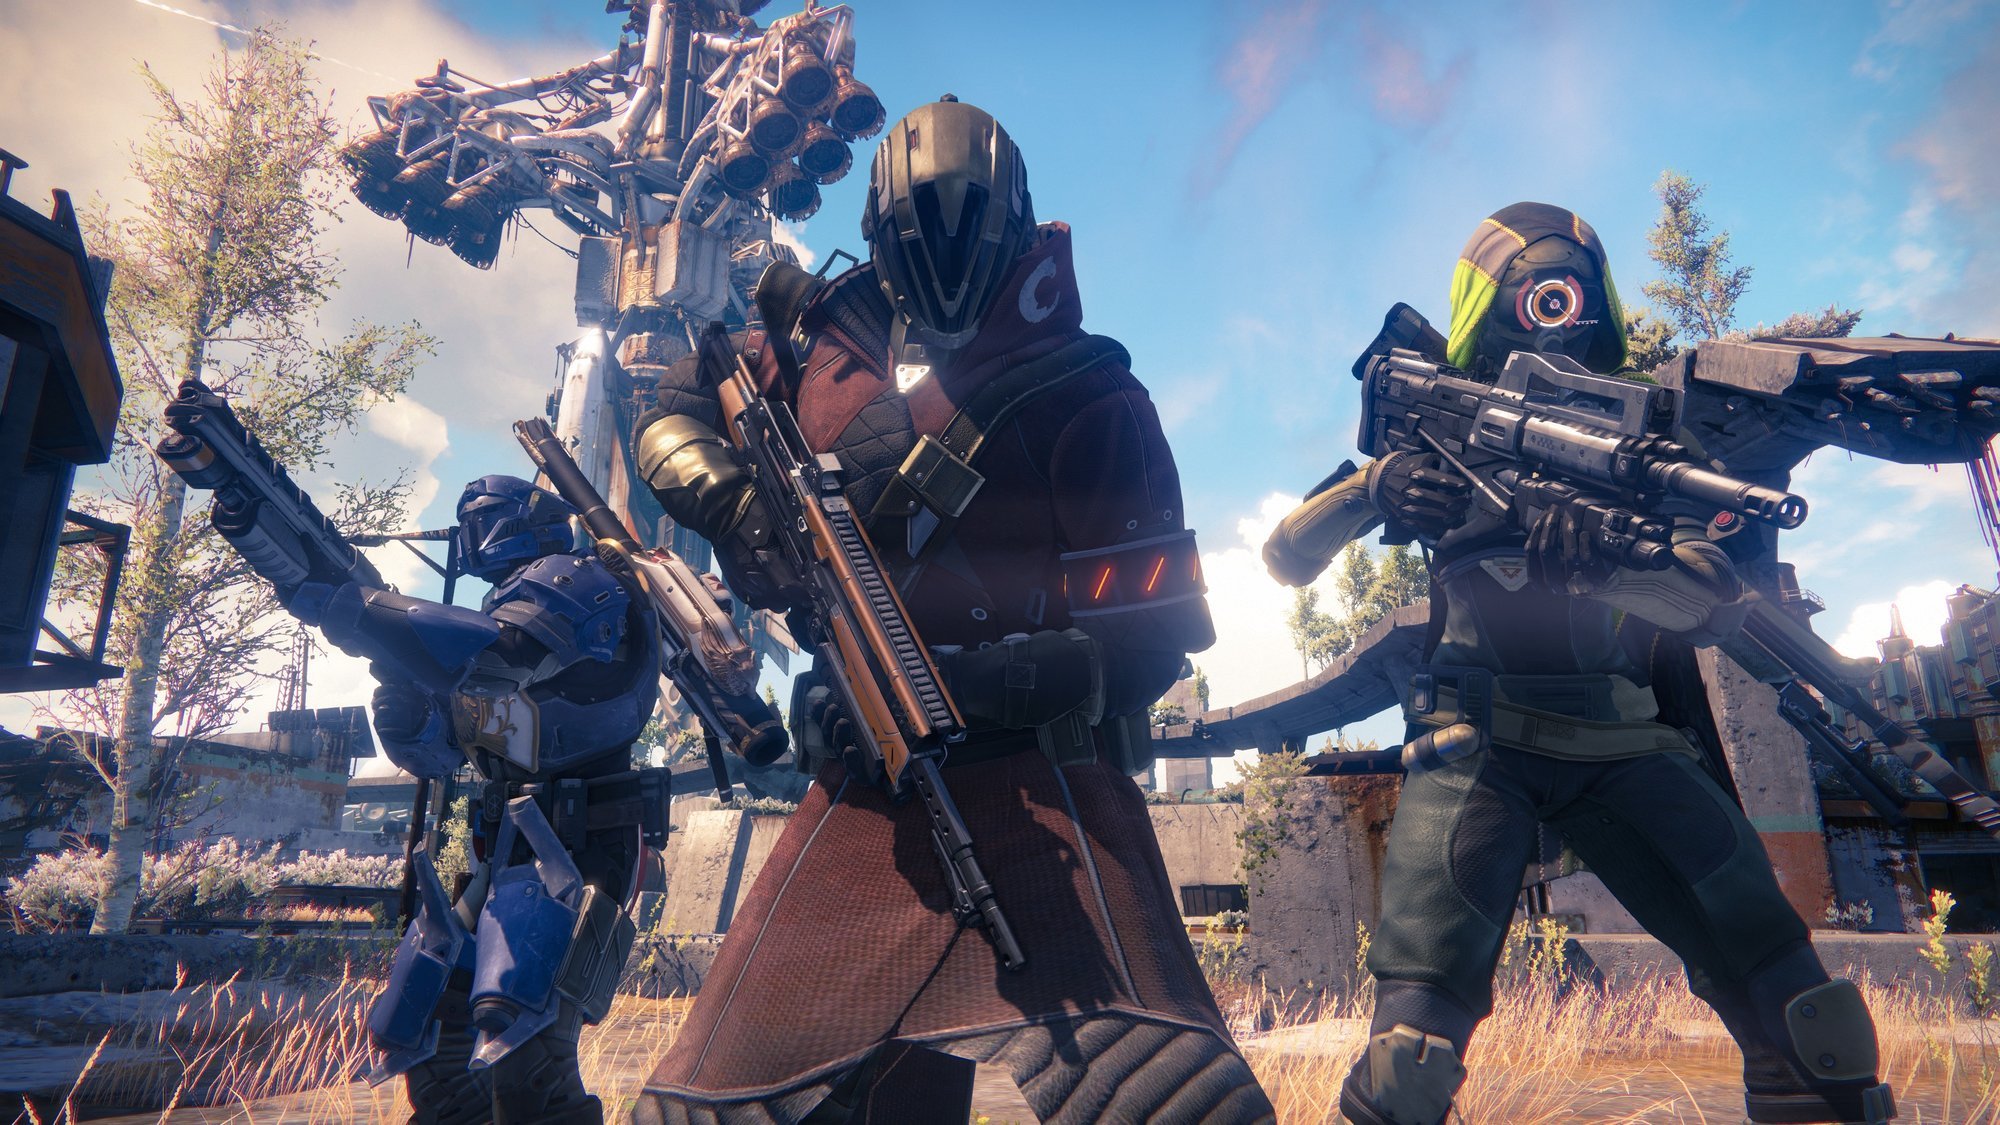 Destiny: info about Missions, Strikes, Areas, Crucible Maps and Items exposed (Spoiler Alert)